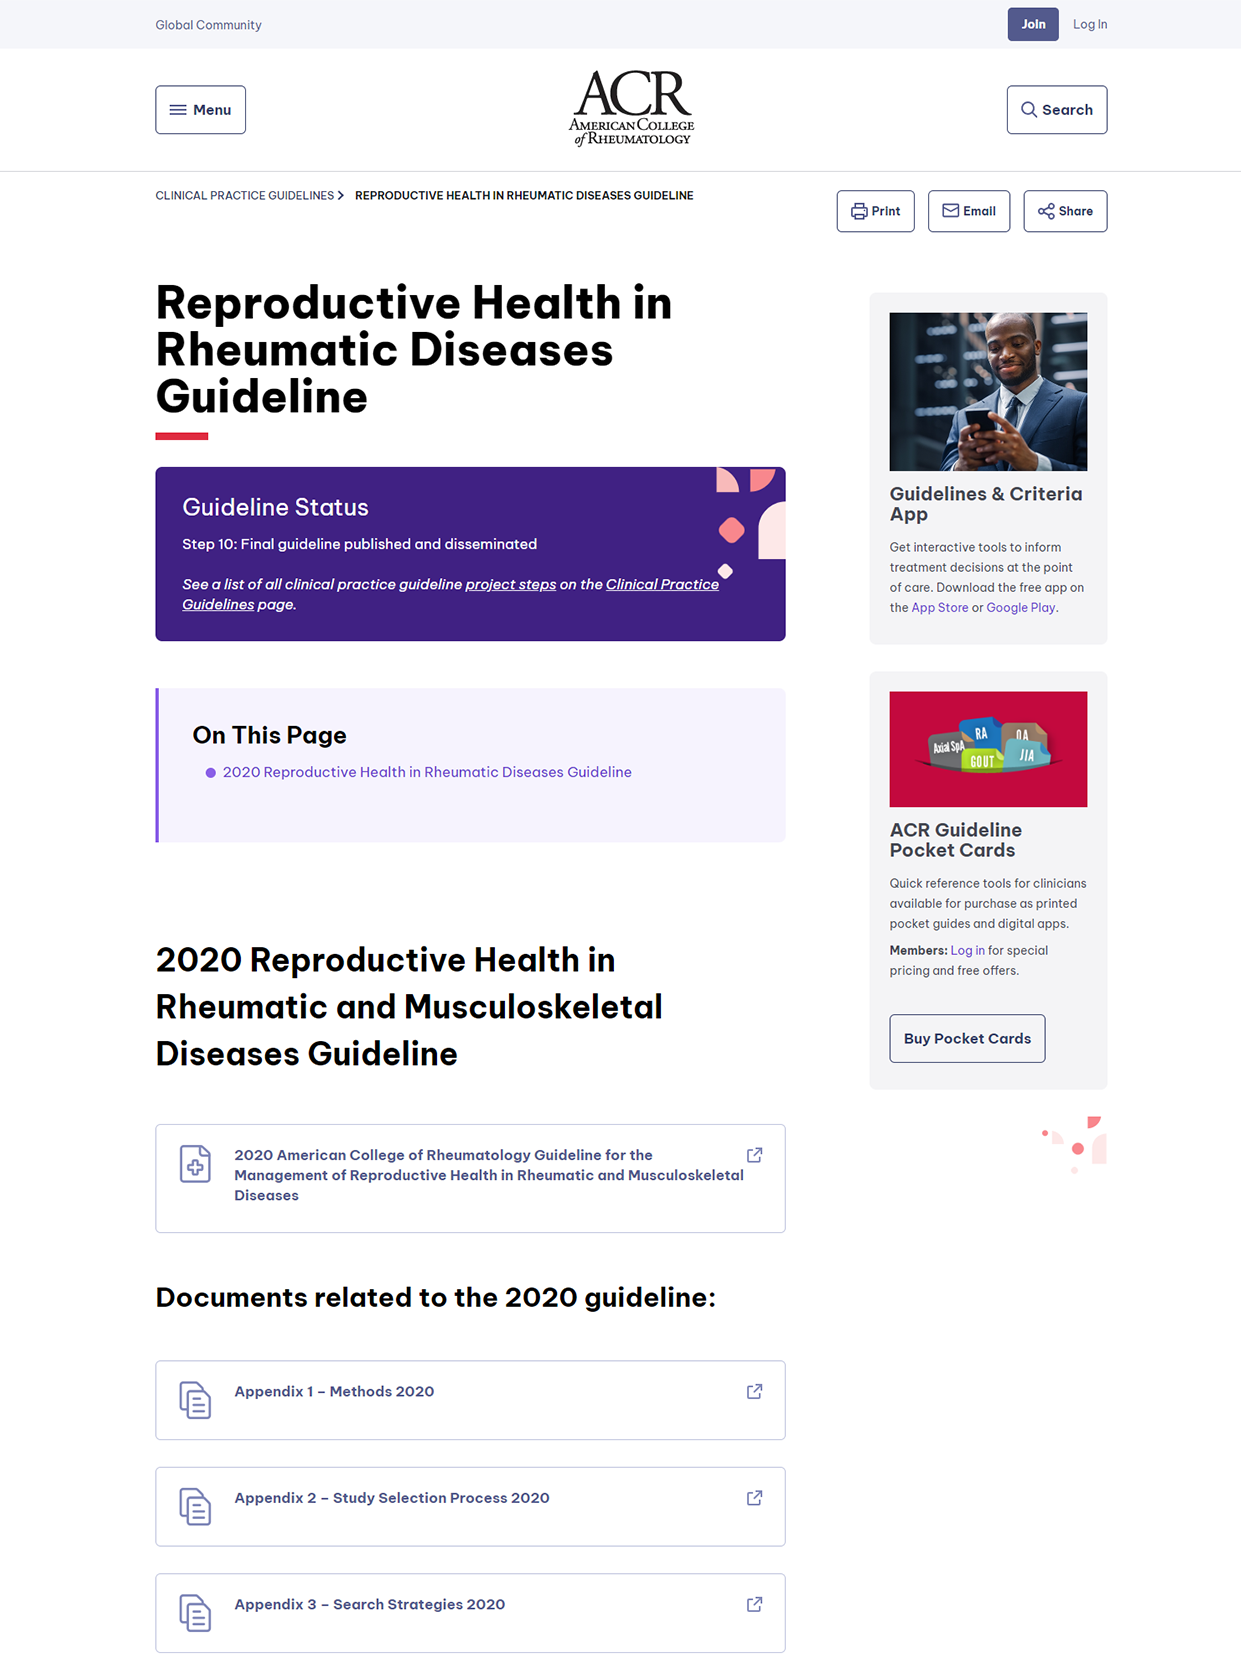 2020 Reproductive Health Guideline (ACR 2020)